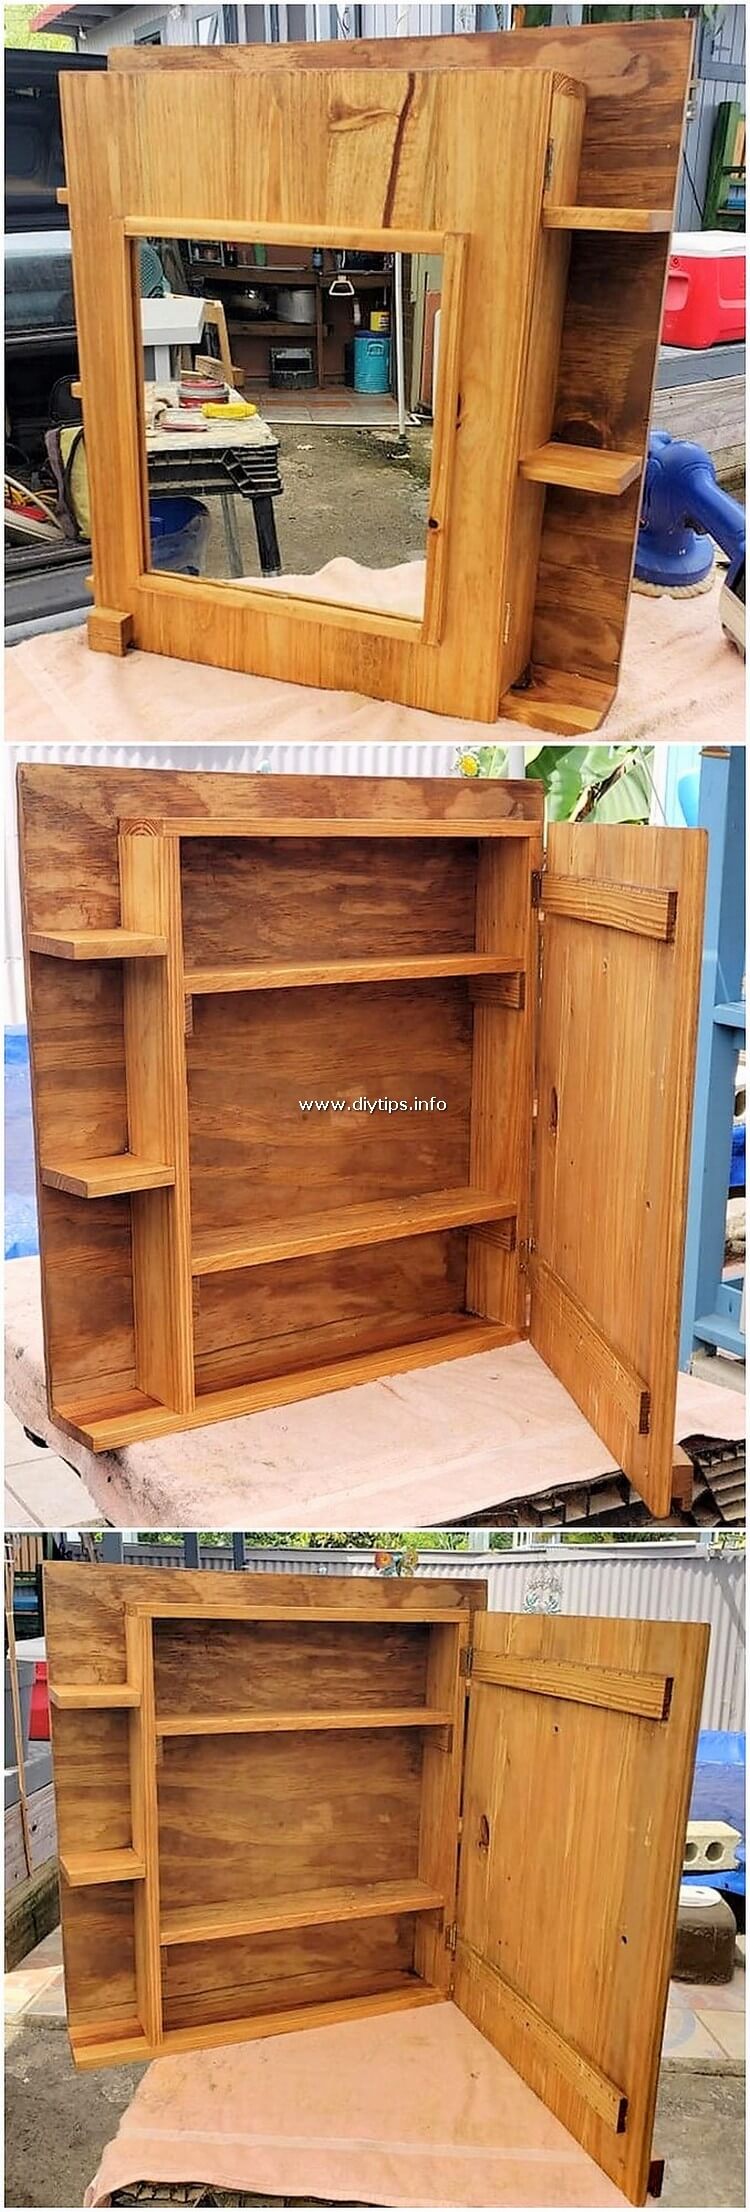 Pallet Mirror Frame with Cabinet